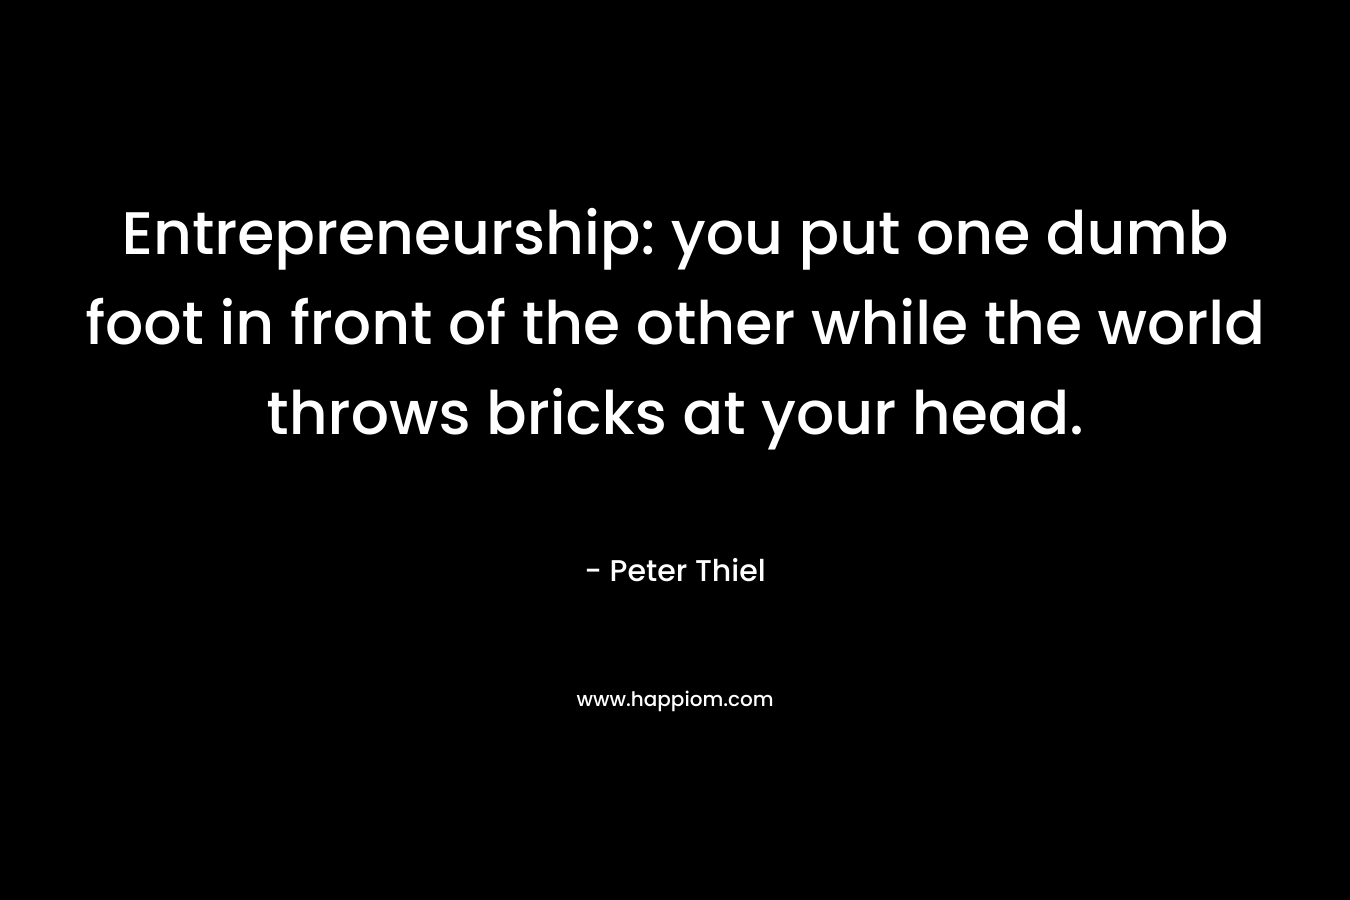 Entrepreneurship: you put one dumb foot in front of the other while the world throws bricks at your head. – Peter Thiel